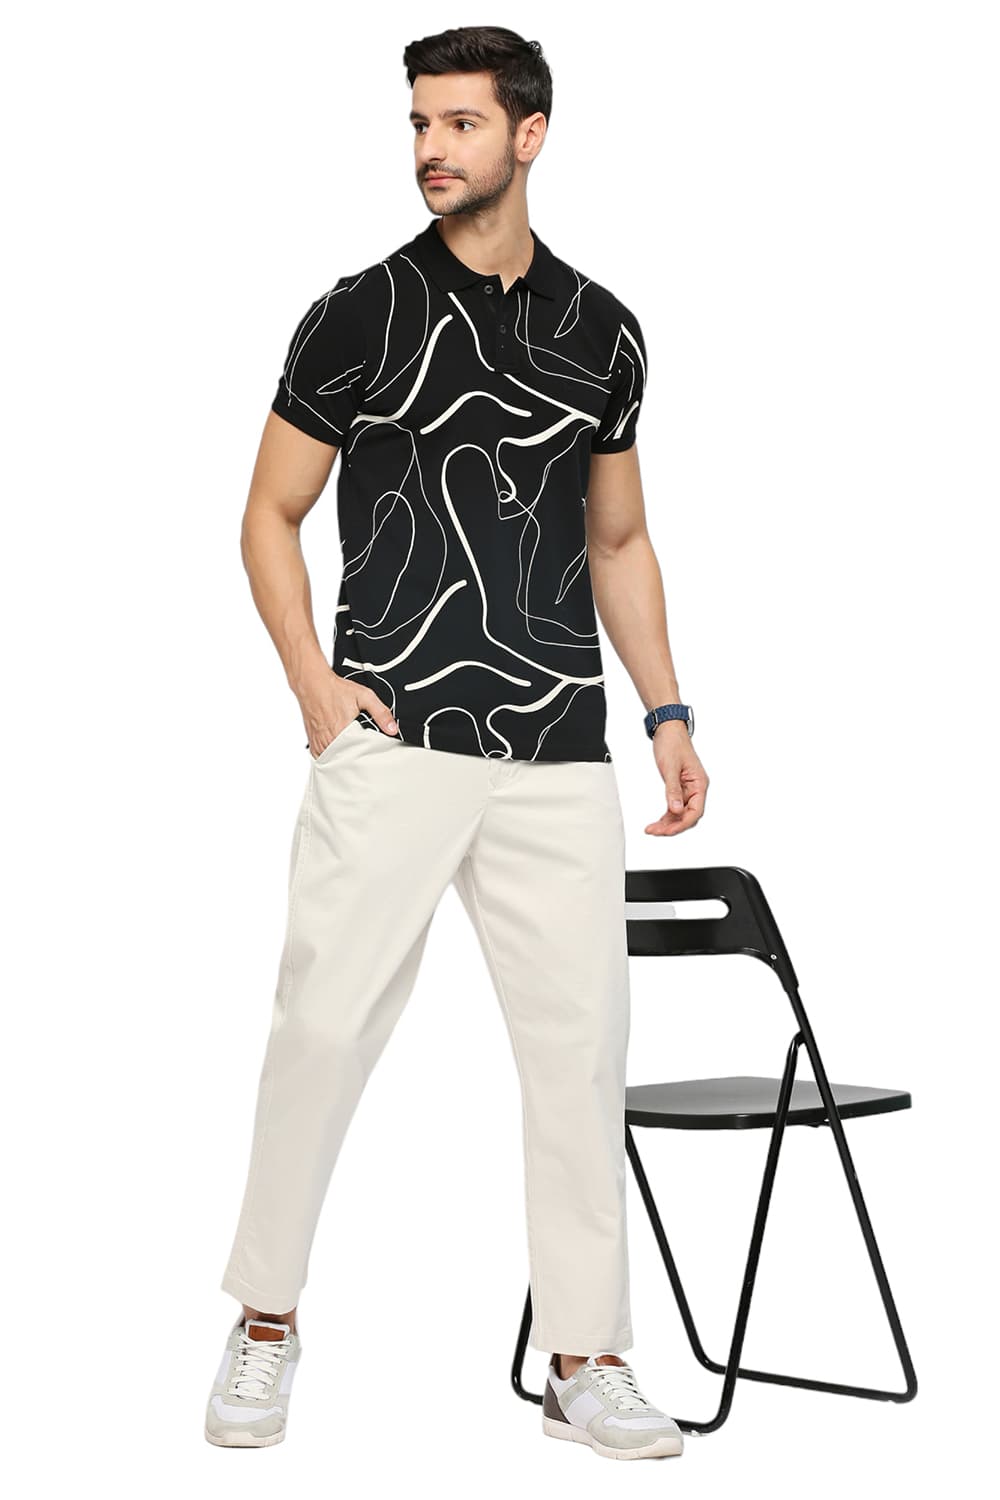 BASICS MUSCLE FIT COTTON PRINTED POLO T-SHIRTS